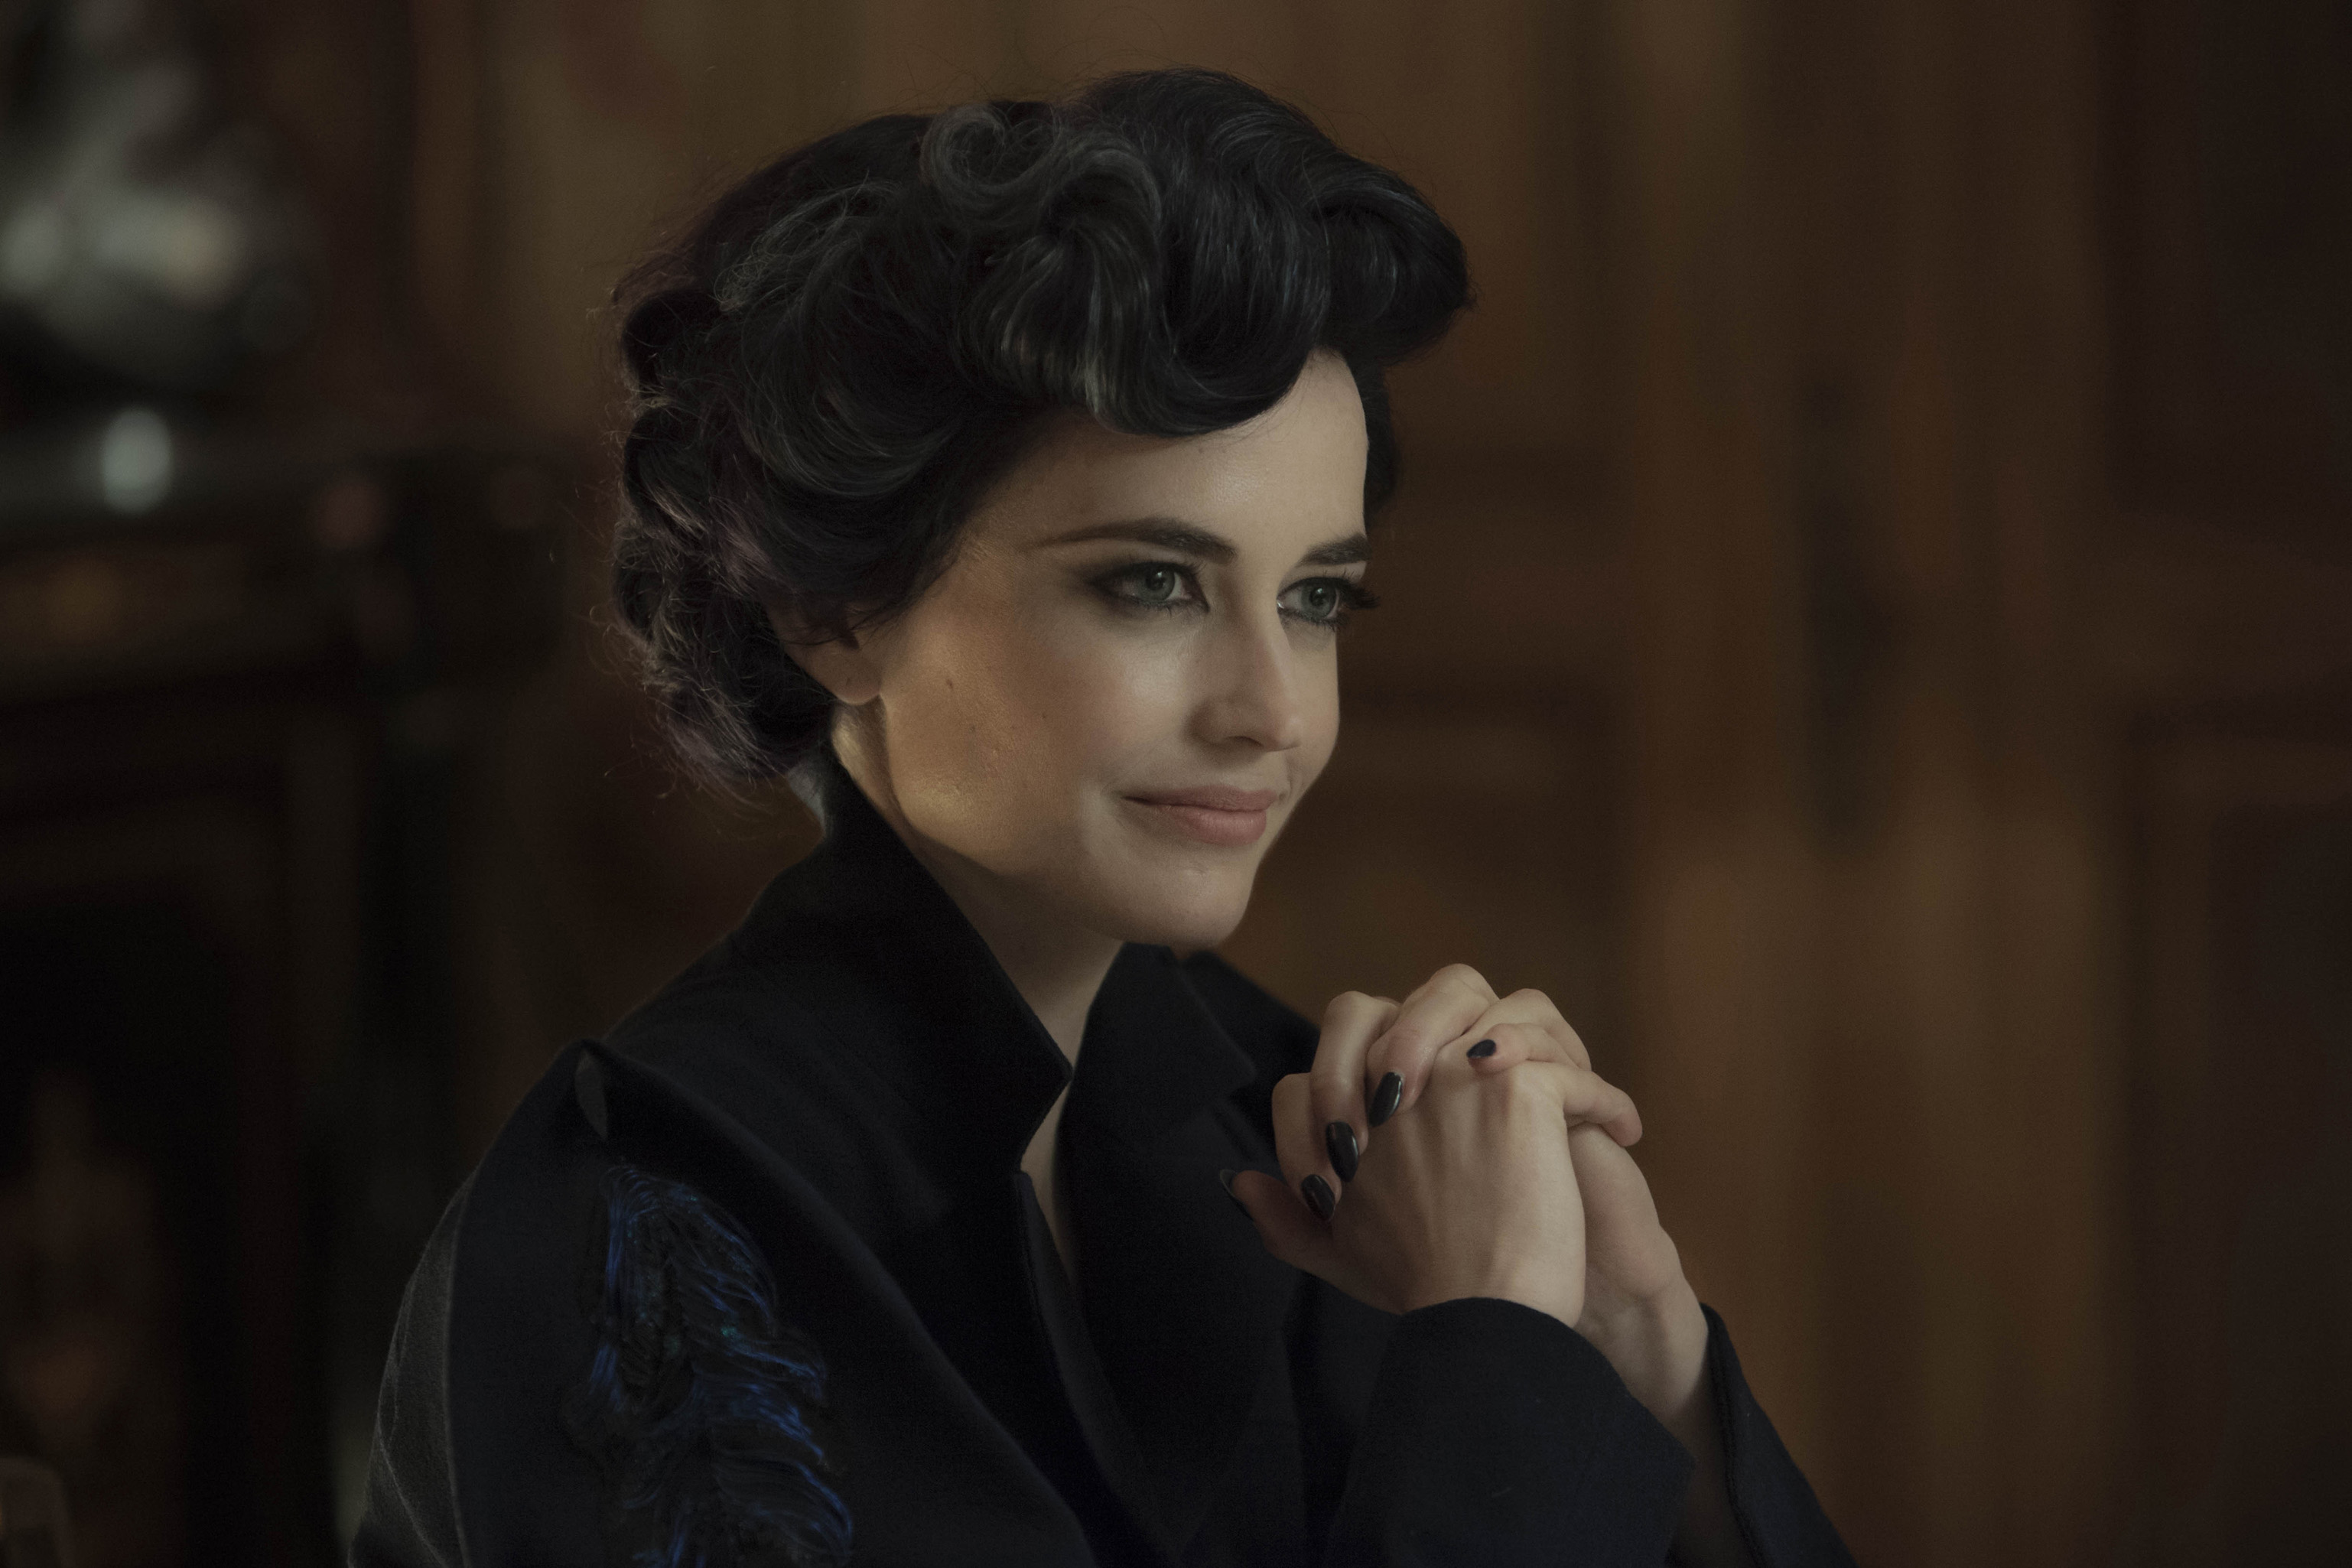 DF-02399crop - Eva Green portrays Miss Peregrine, who oversees a magical place that is threatened by powerful enemies. Photo Credit: Leah Gallo.